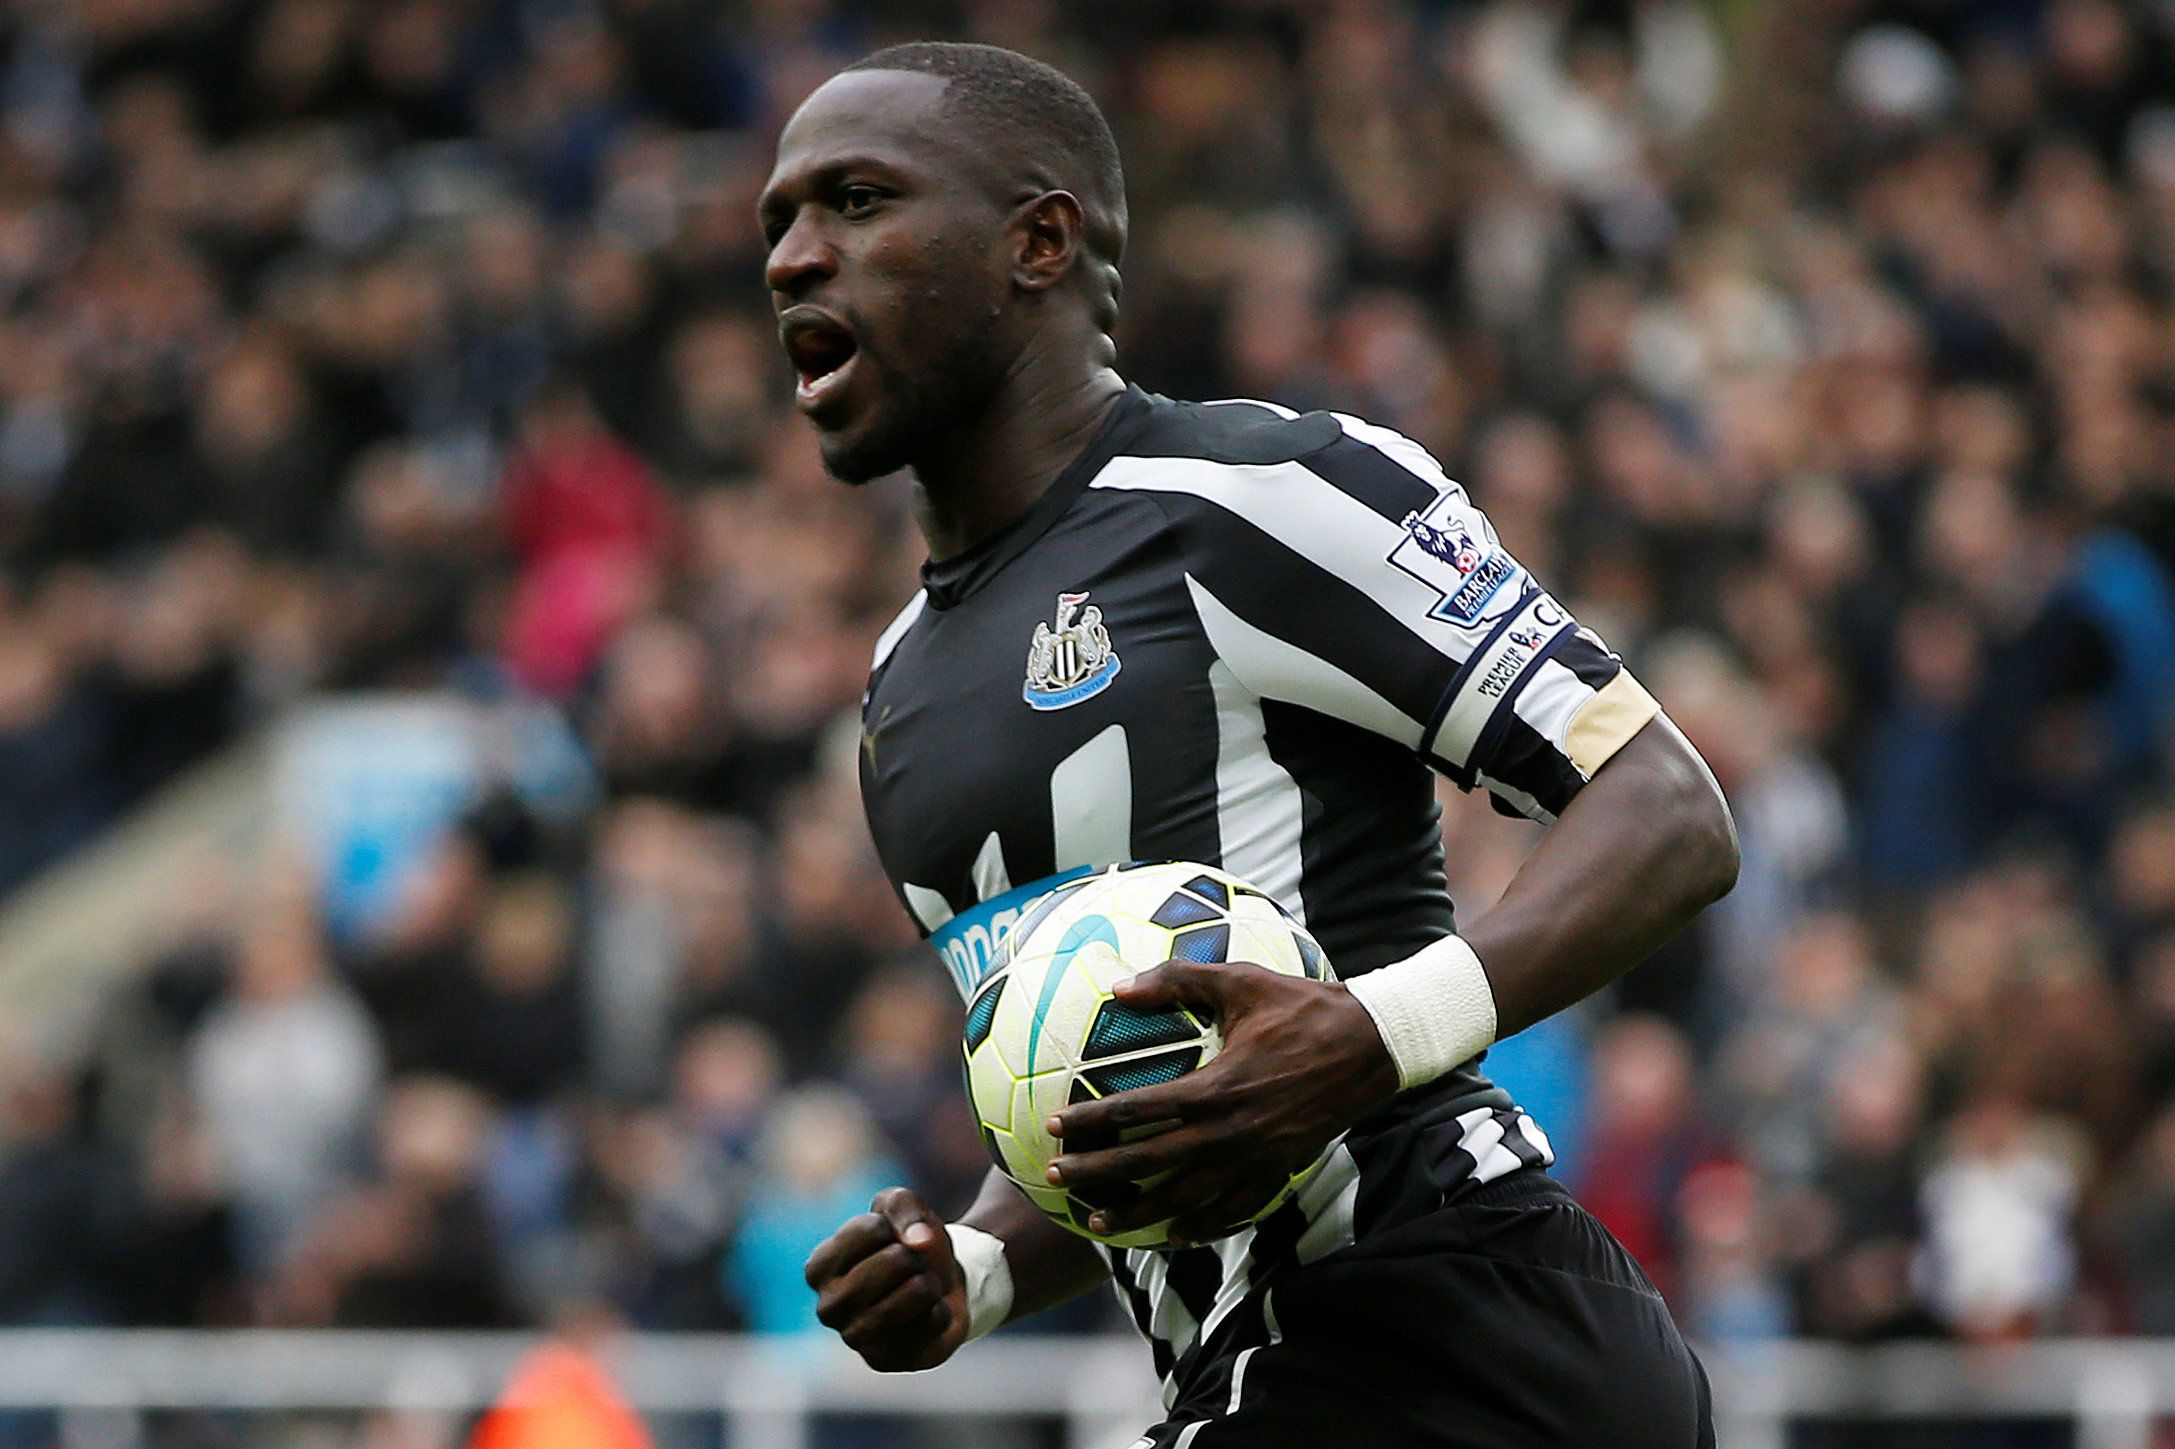 Football - Newcastle United v Arsenal - Barclays Premier League - St James' Park - 21/3/15Newcastle's Moussa Sissoko celebrates scoring their first goal. REUTERS/Andrew Yates/FilesLivepic EDITORIAL USE ONLY. No use with unauthorized audio, video, data, fixture lists, club/league logos or 